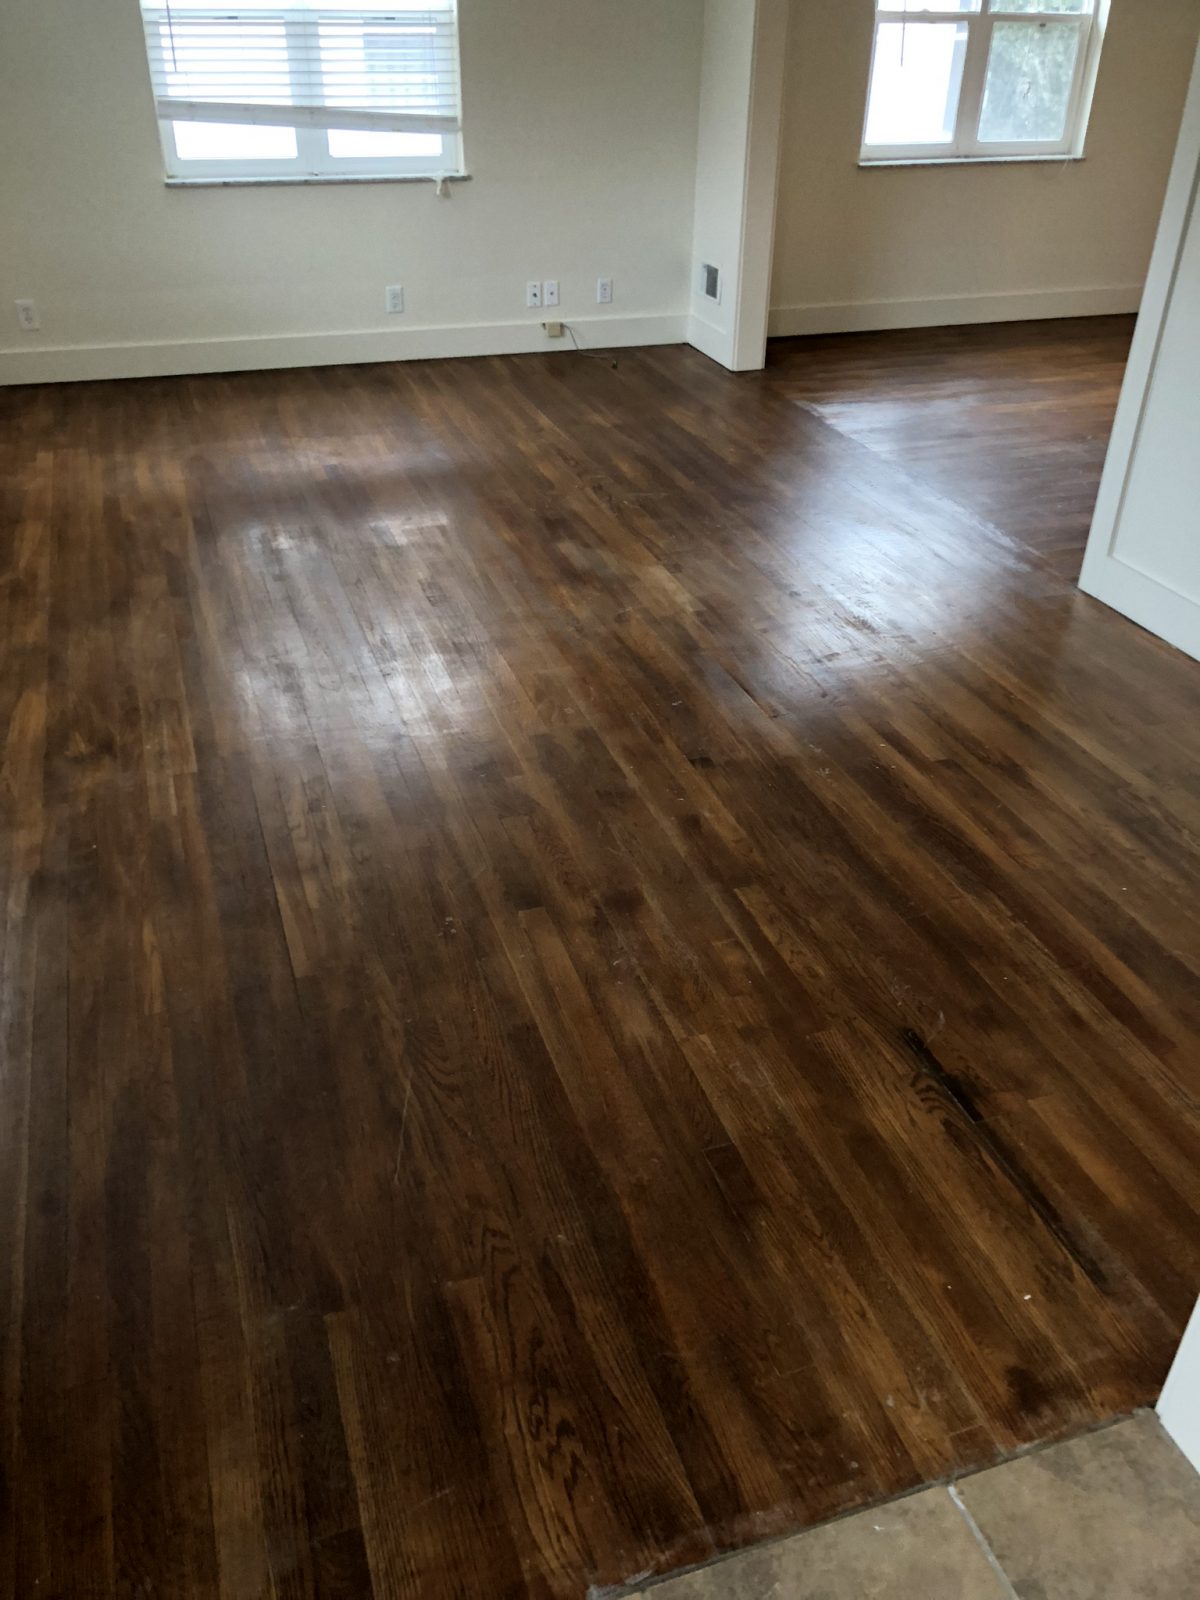 Professional Hardwood Floor Cleaning Morrow Ohio by Howards Cleaning Service